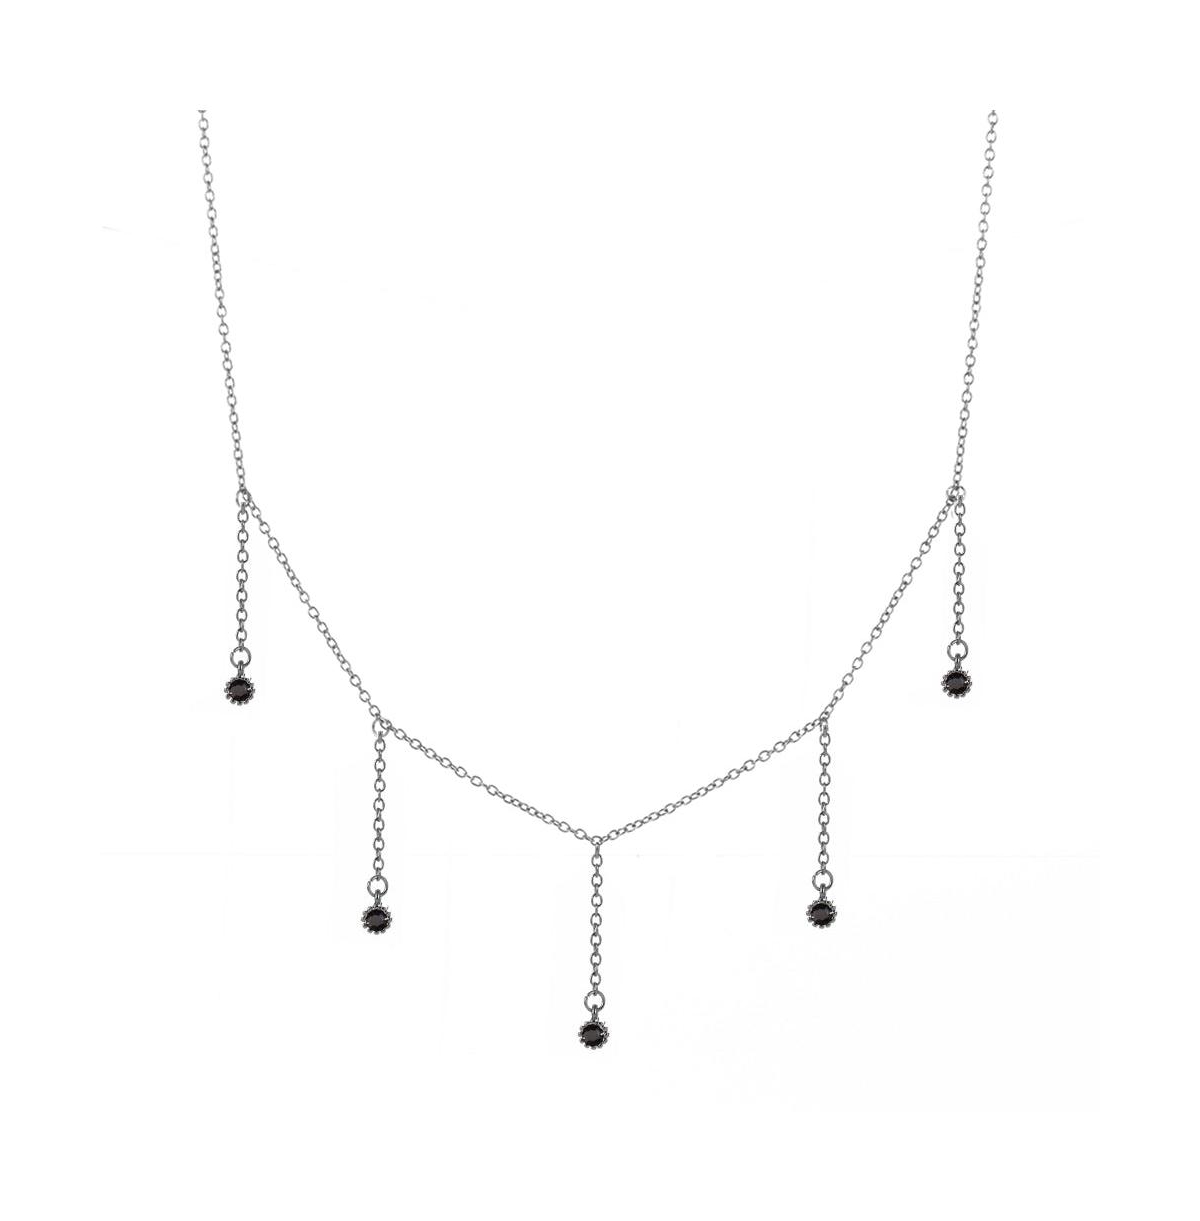 Drop Necklace for Women with Five Cubic Zirconia Stone - Silver Black Cubic Zirconia